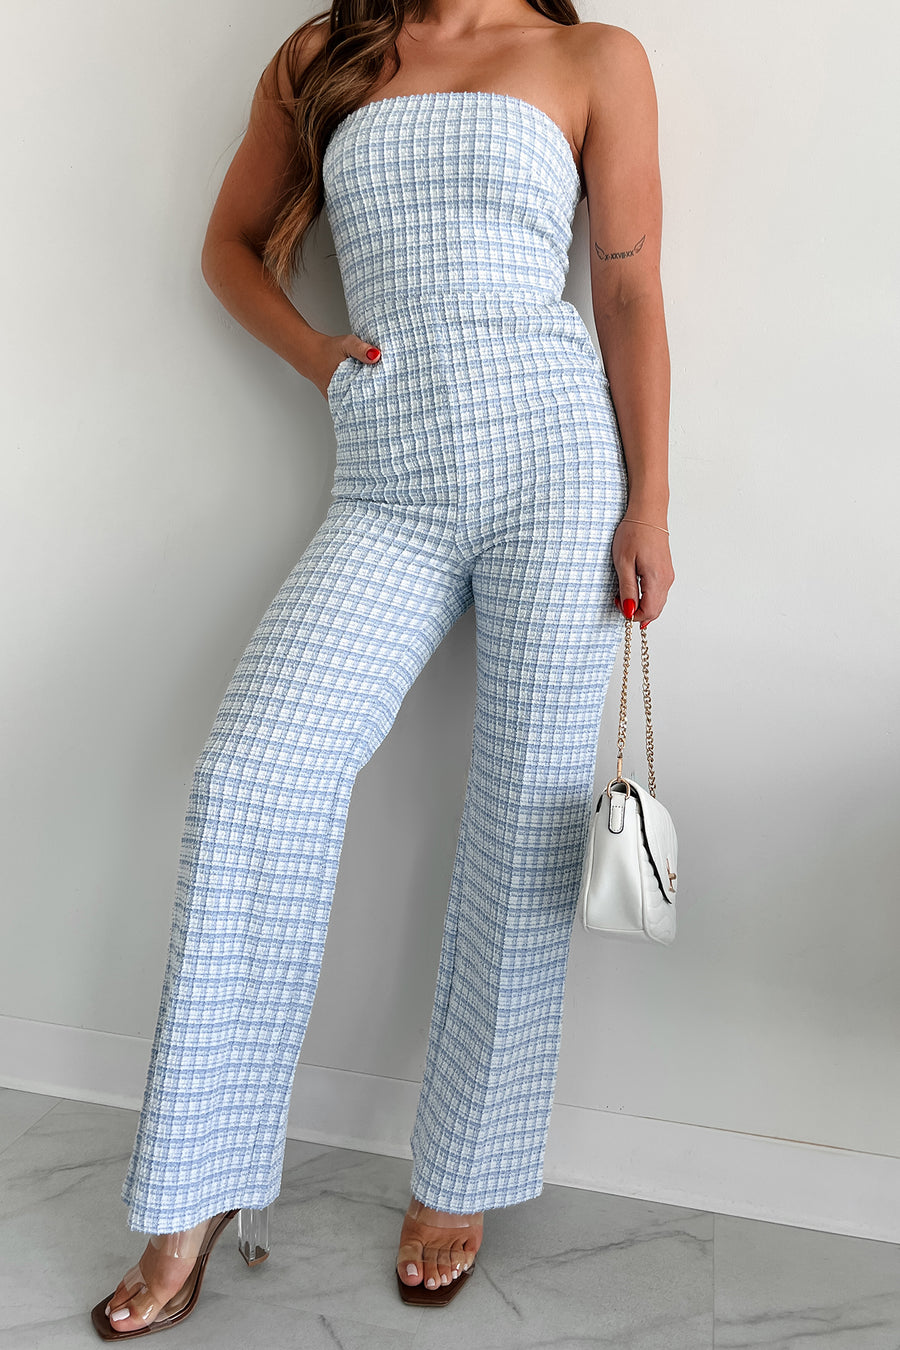 Influential Position Stretchy Tweed Jumpsuit (Ivory/Blue)